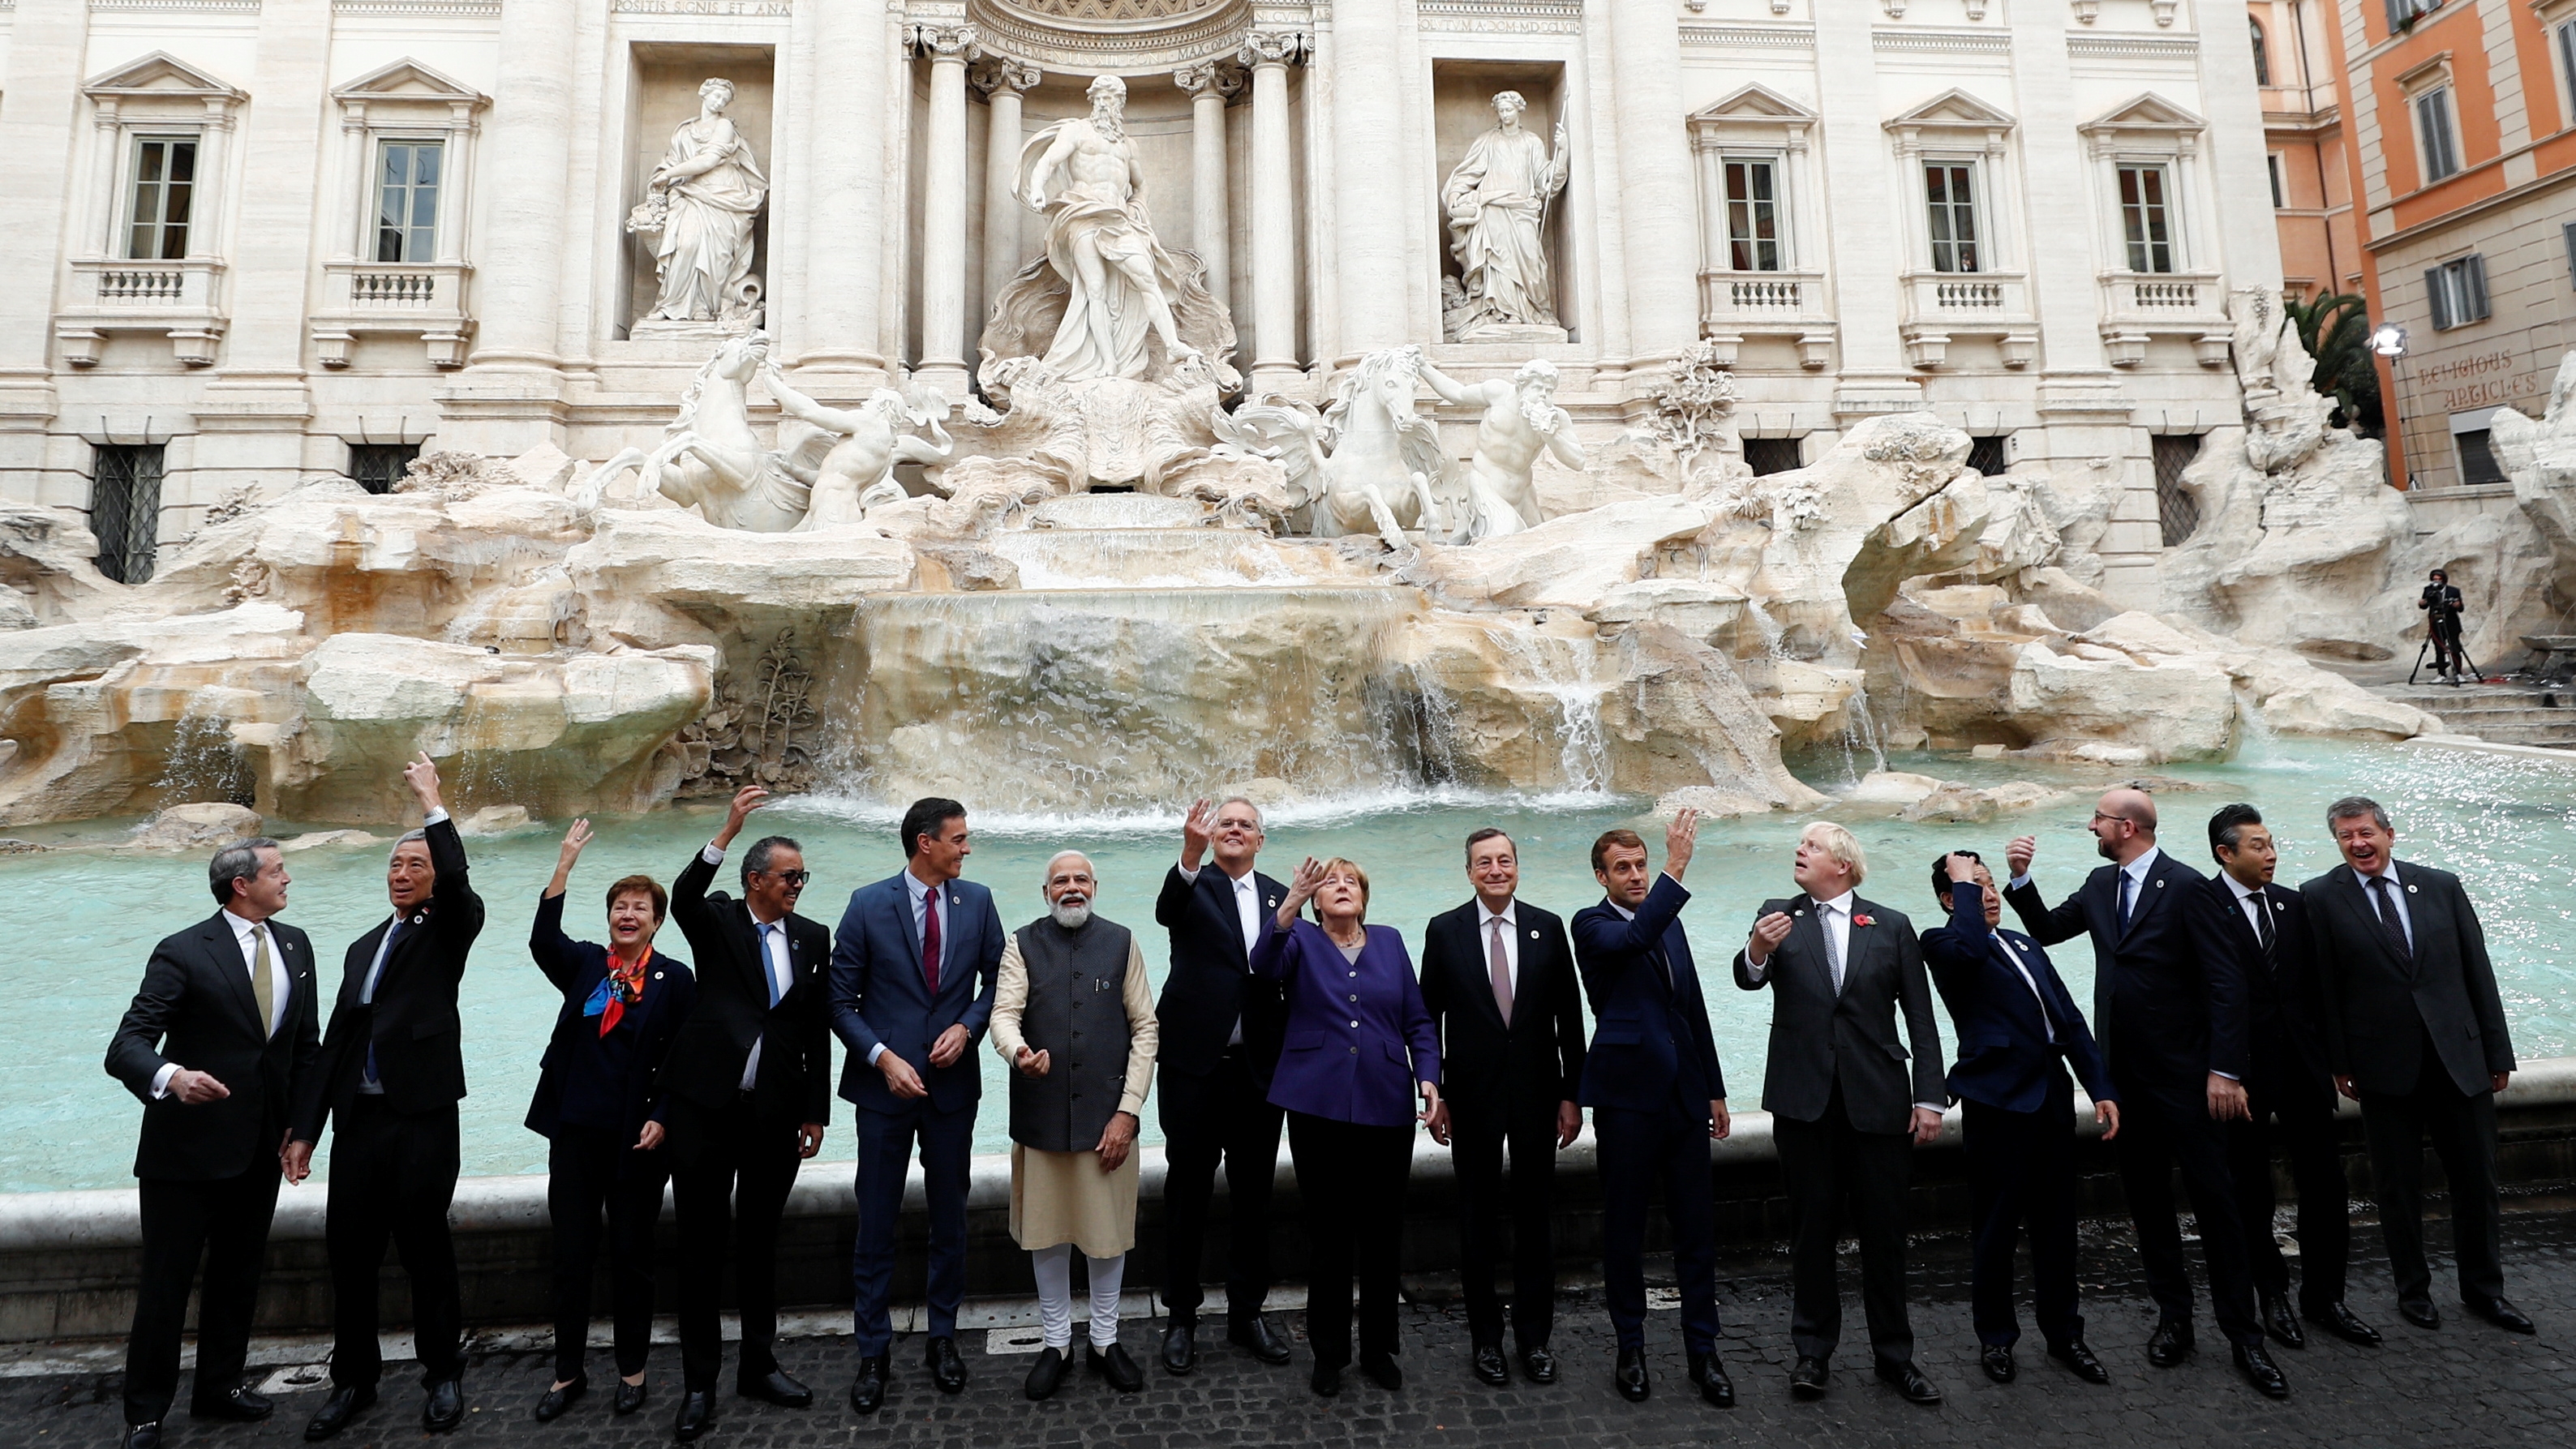 G20 leaders toss a coin into Rome's iconic Trevi Fountain on the sidelines of the G20 summit in Rome, Italy, October 31, 2021. REUTERS/Guglielmo Mangiapane